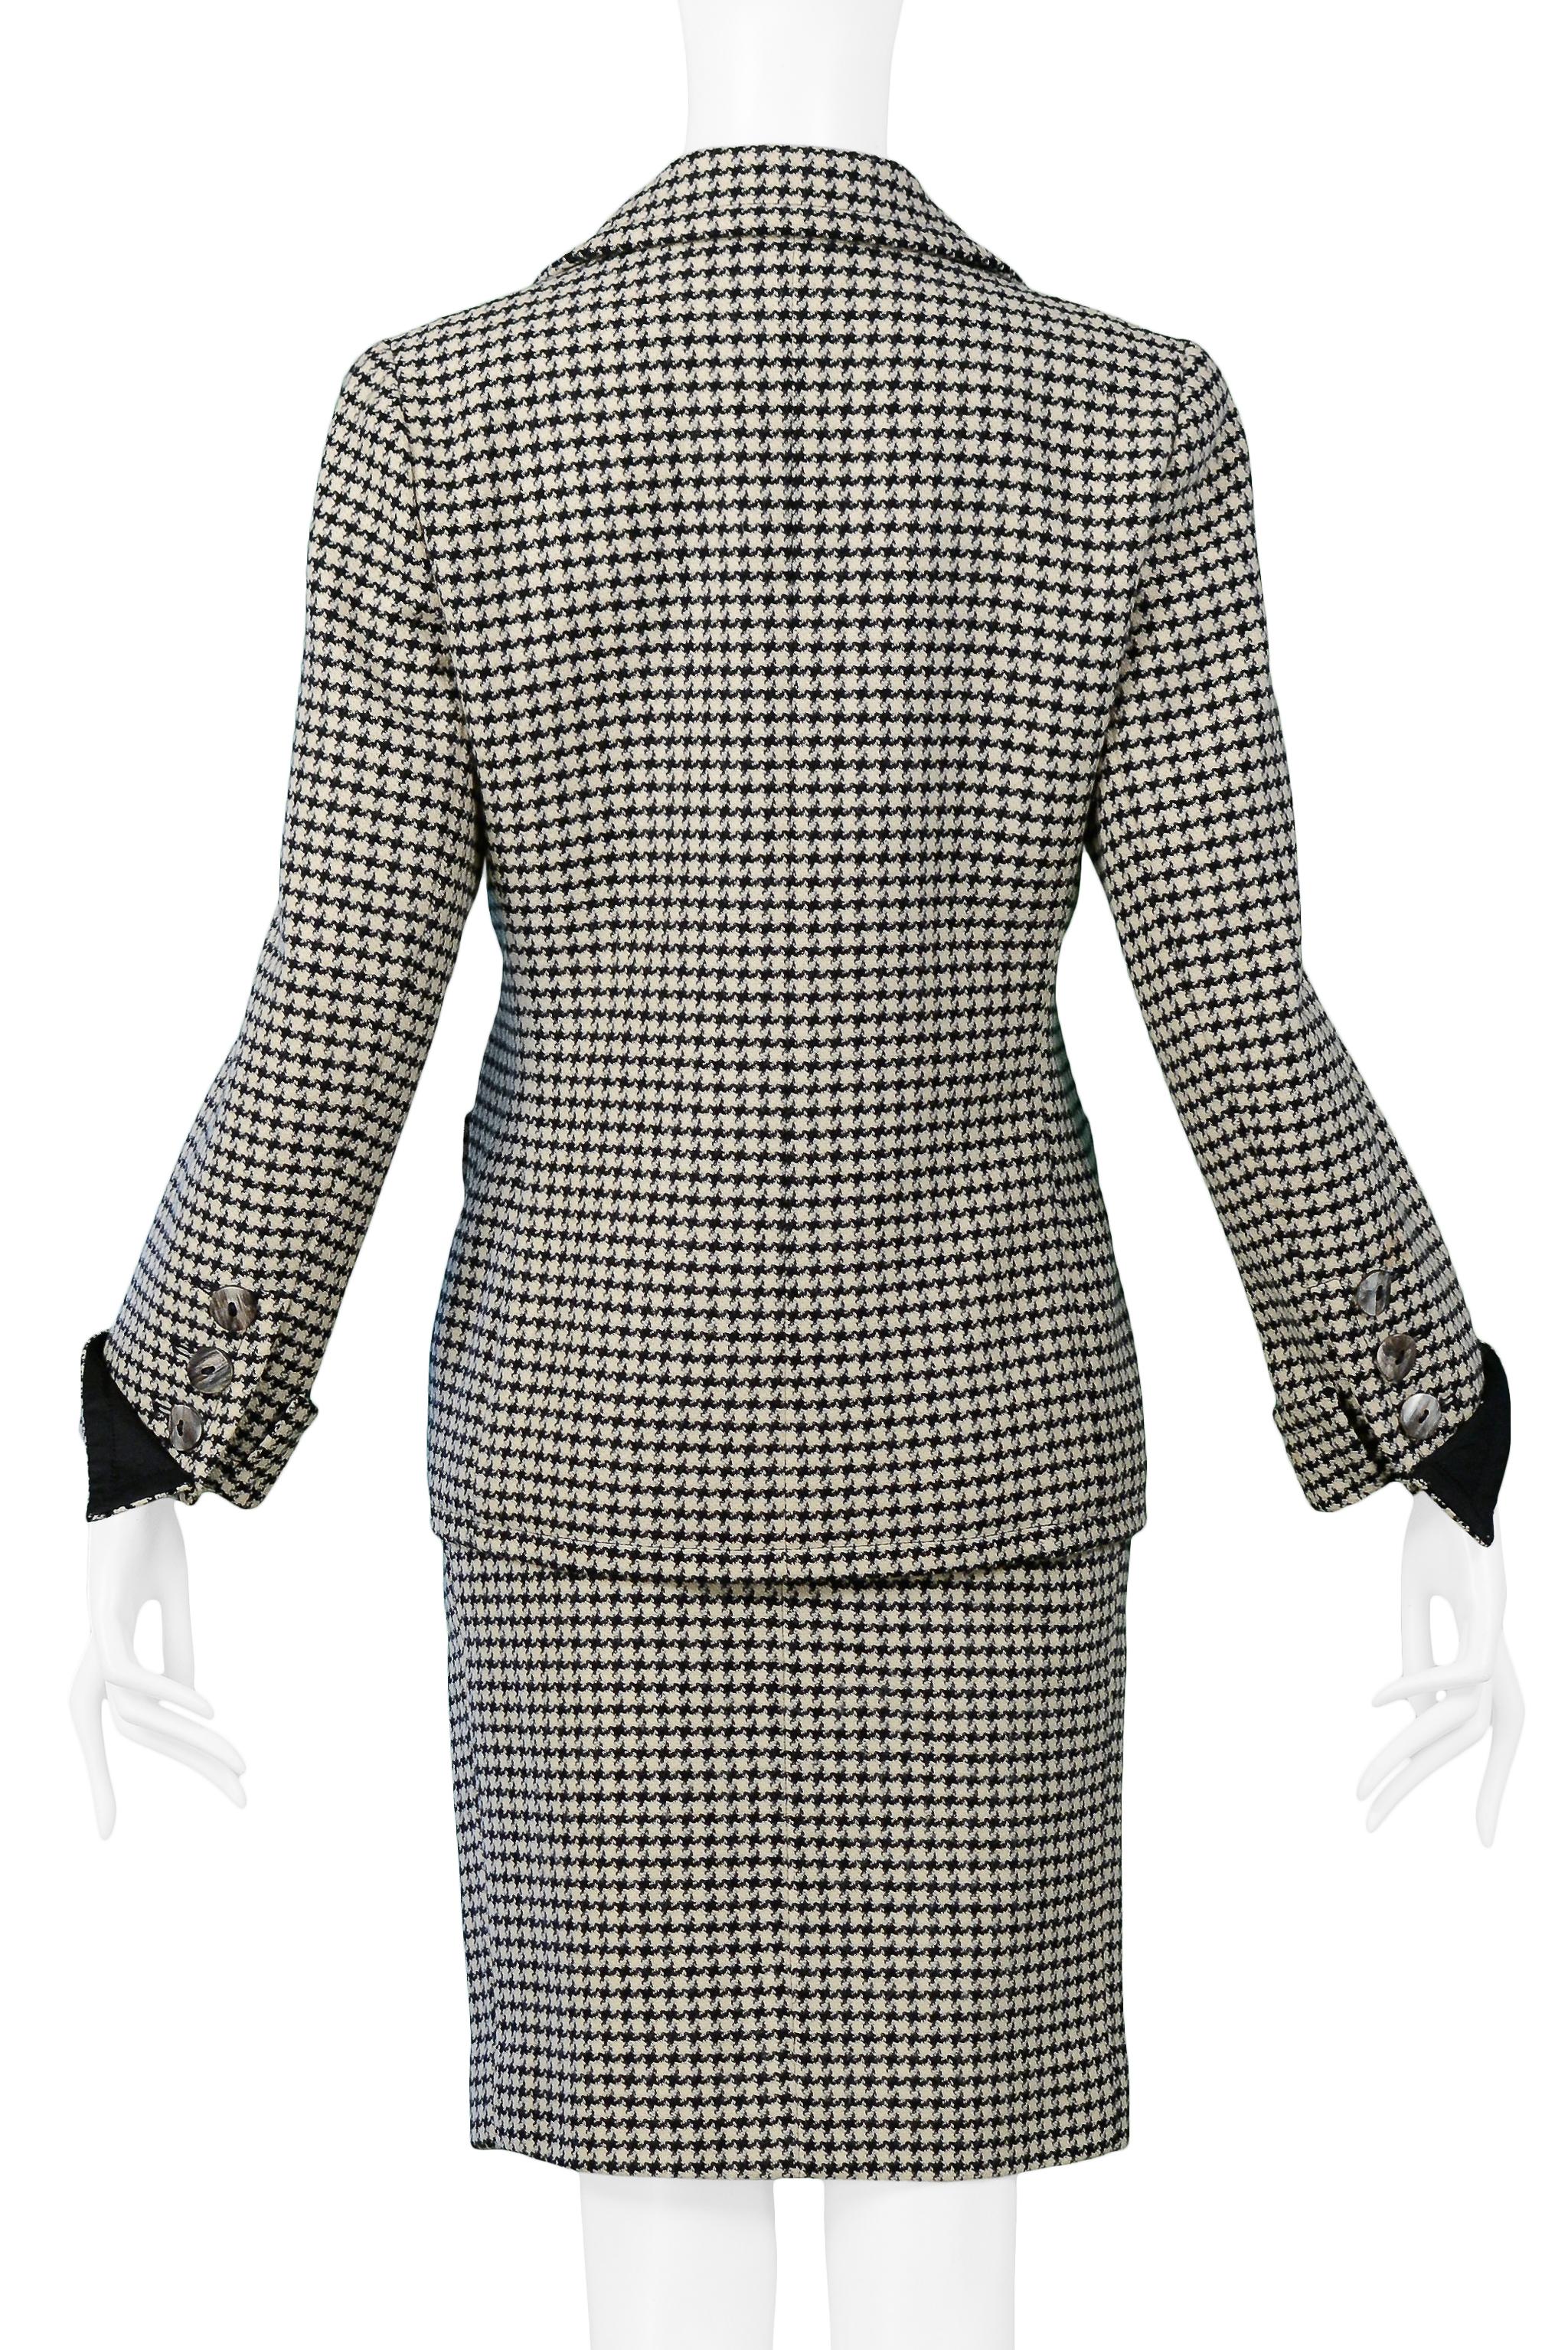 Yves Saint Laurent YSL Black & White Check Wool Skirt Suit In Excellent Condition For Sale In Los Angeles, CA